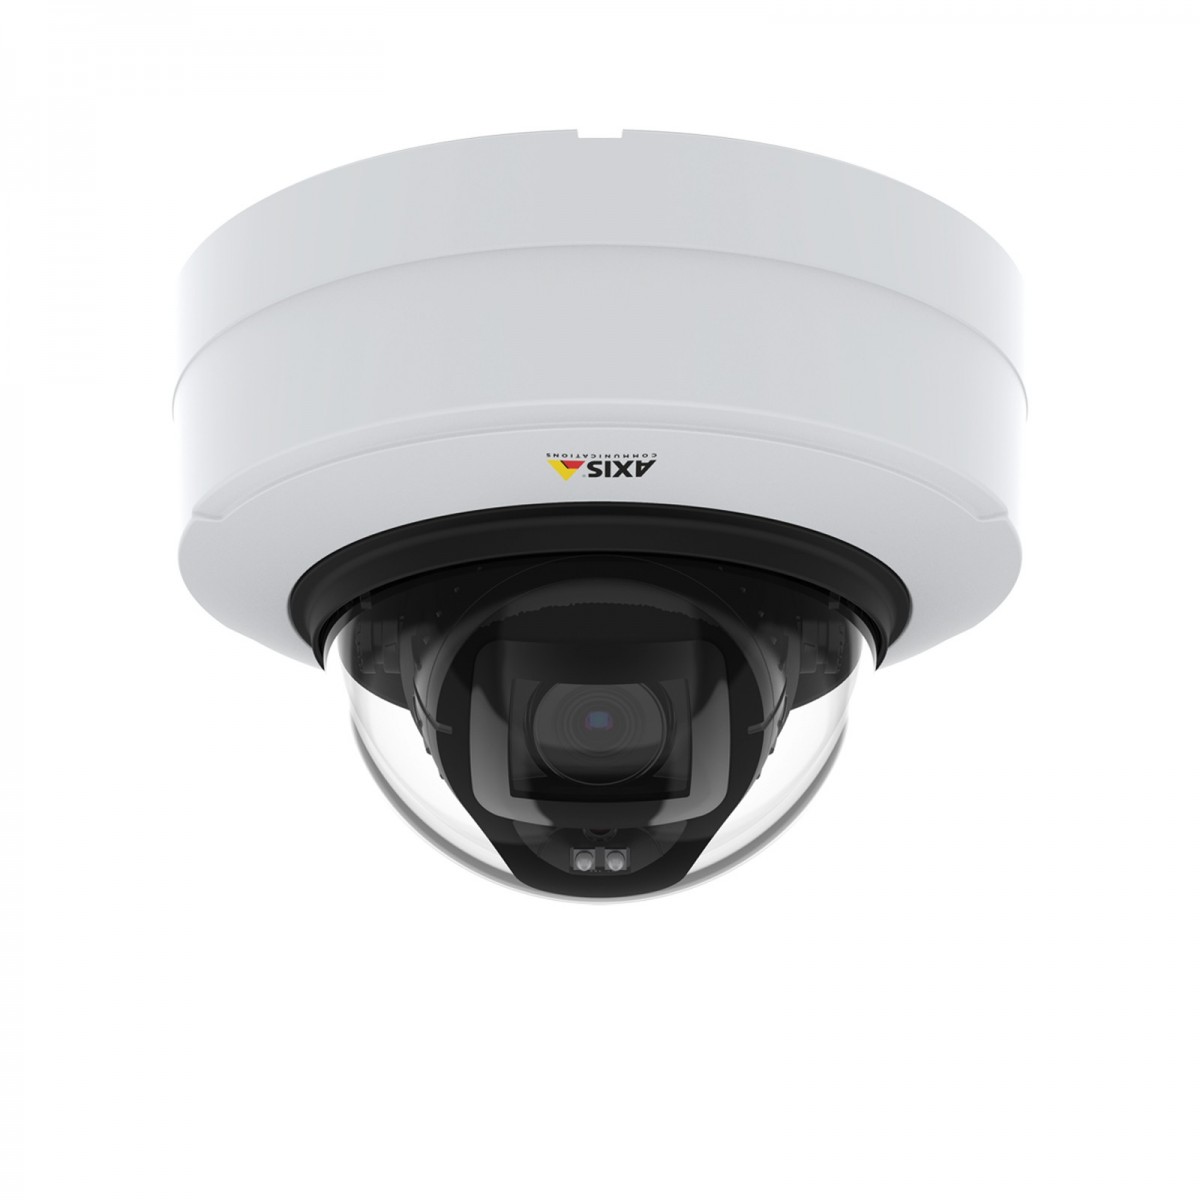 Axis P3247-LV - IP security camera - Outdoor - Wired - Dome - Ceiling/wall - Black - White